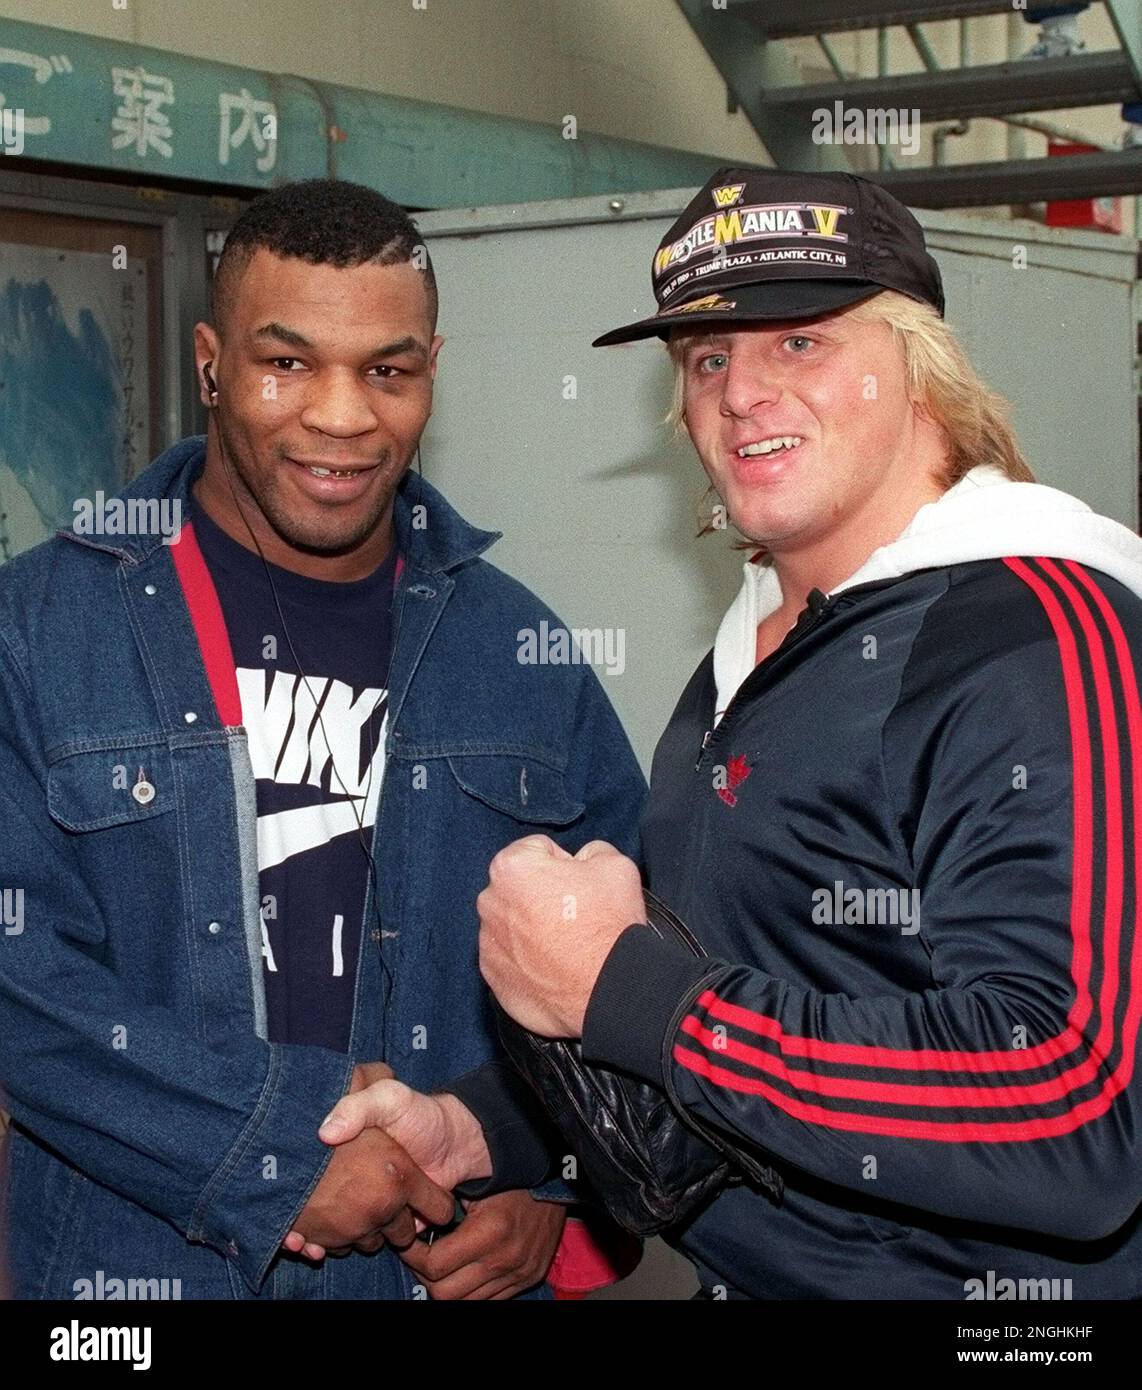 https://c8.alamy.com/comp/2NGHKHF/canadian-professional-wrestler-owen-hart-right-poses-with-heavyweight-boxing-champion-mike-tyson-at-the-korakuen-gym-in-tokyo-japan-on-monday-jan-29-1990-hart-a-father-of-two-was-killed-in-may-1999-when-he-plunged-to-his-death-during-a-wrestling-stunt-at-kemper-arena-in-kansas-city-ap-phototsugufumi-matsumoto-2NGHKHF.jpg